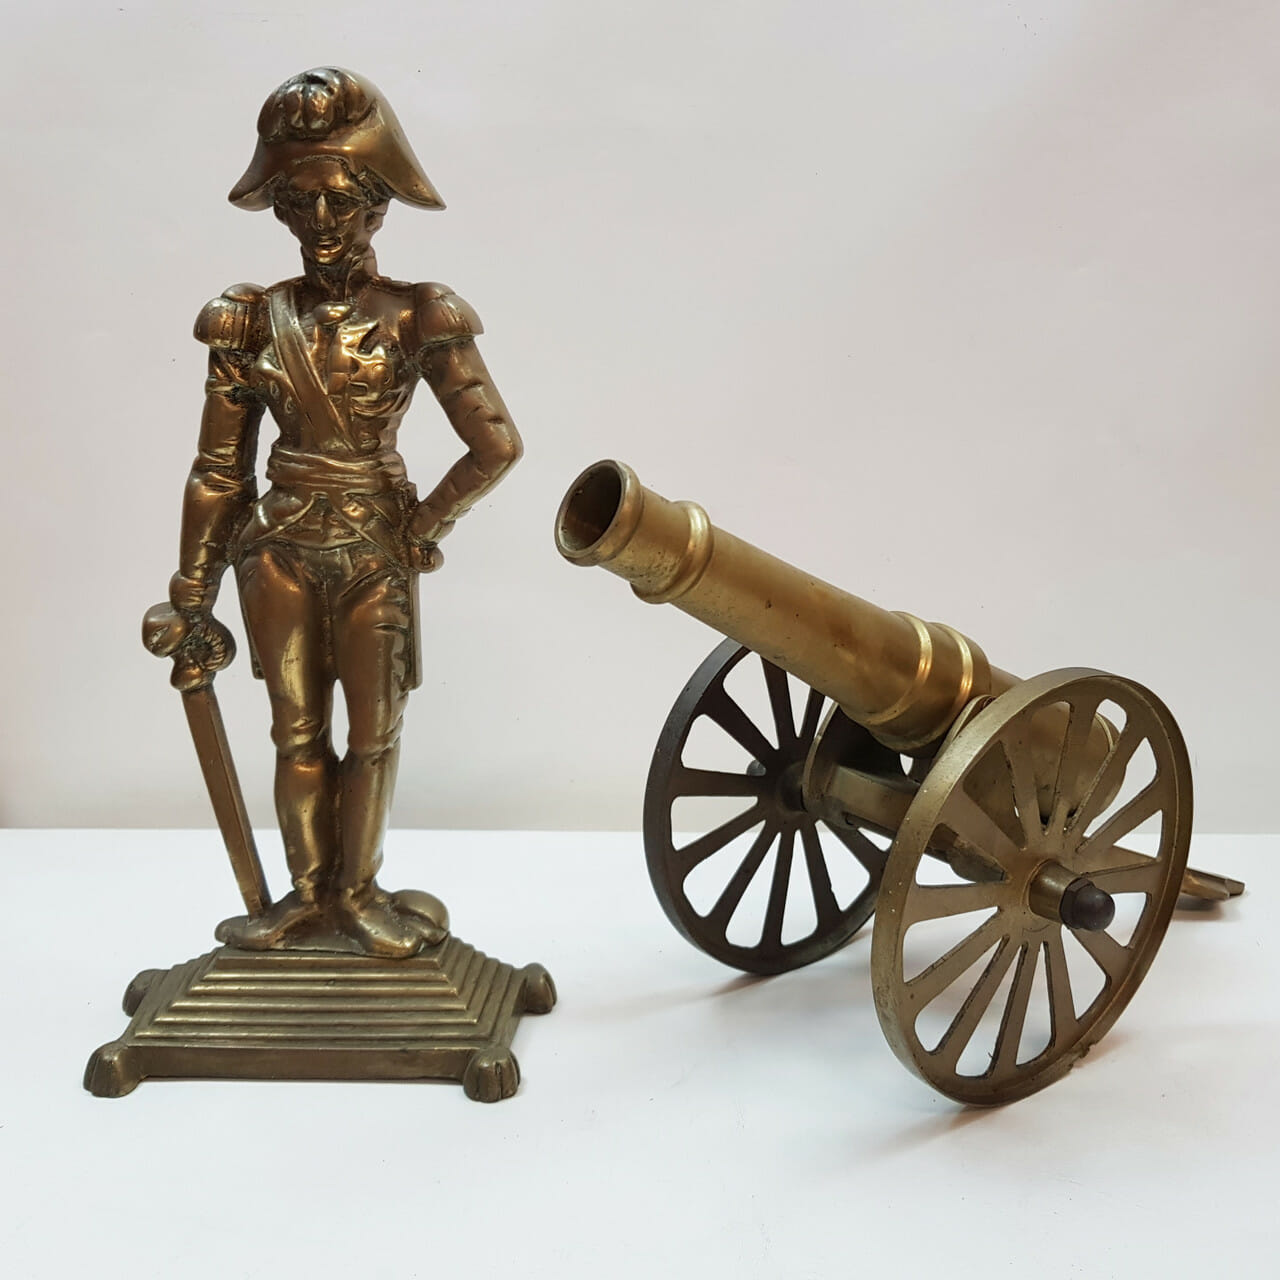 BRASS FRENCH SOLDIER AND CANNON FIGURINE / STATUES #54062